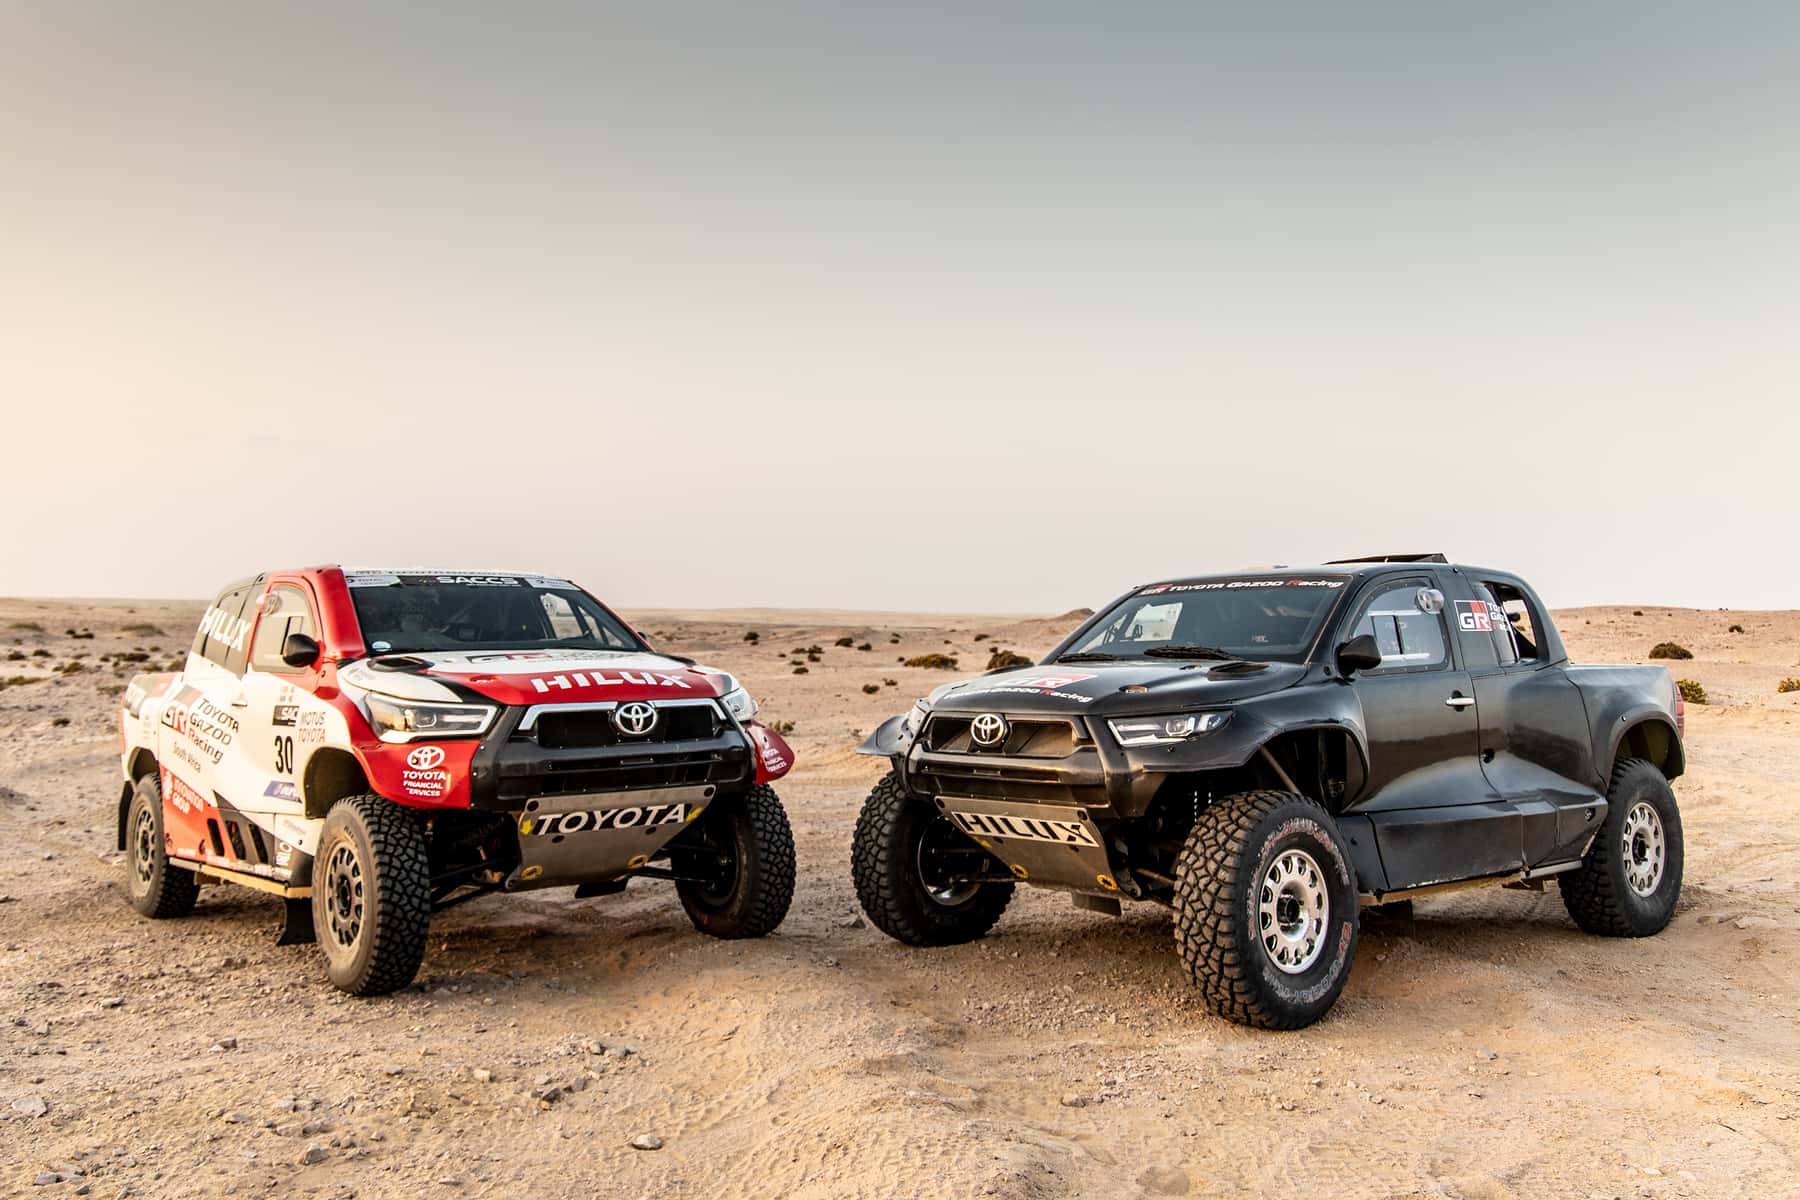 Toyota GR Hilux OffRoader Revealed Ahead Of 2022 Dakar Rally